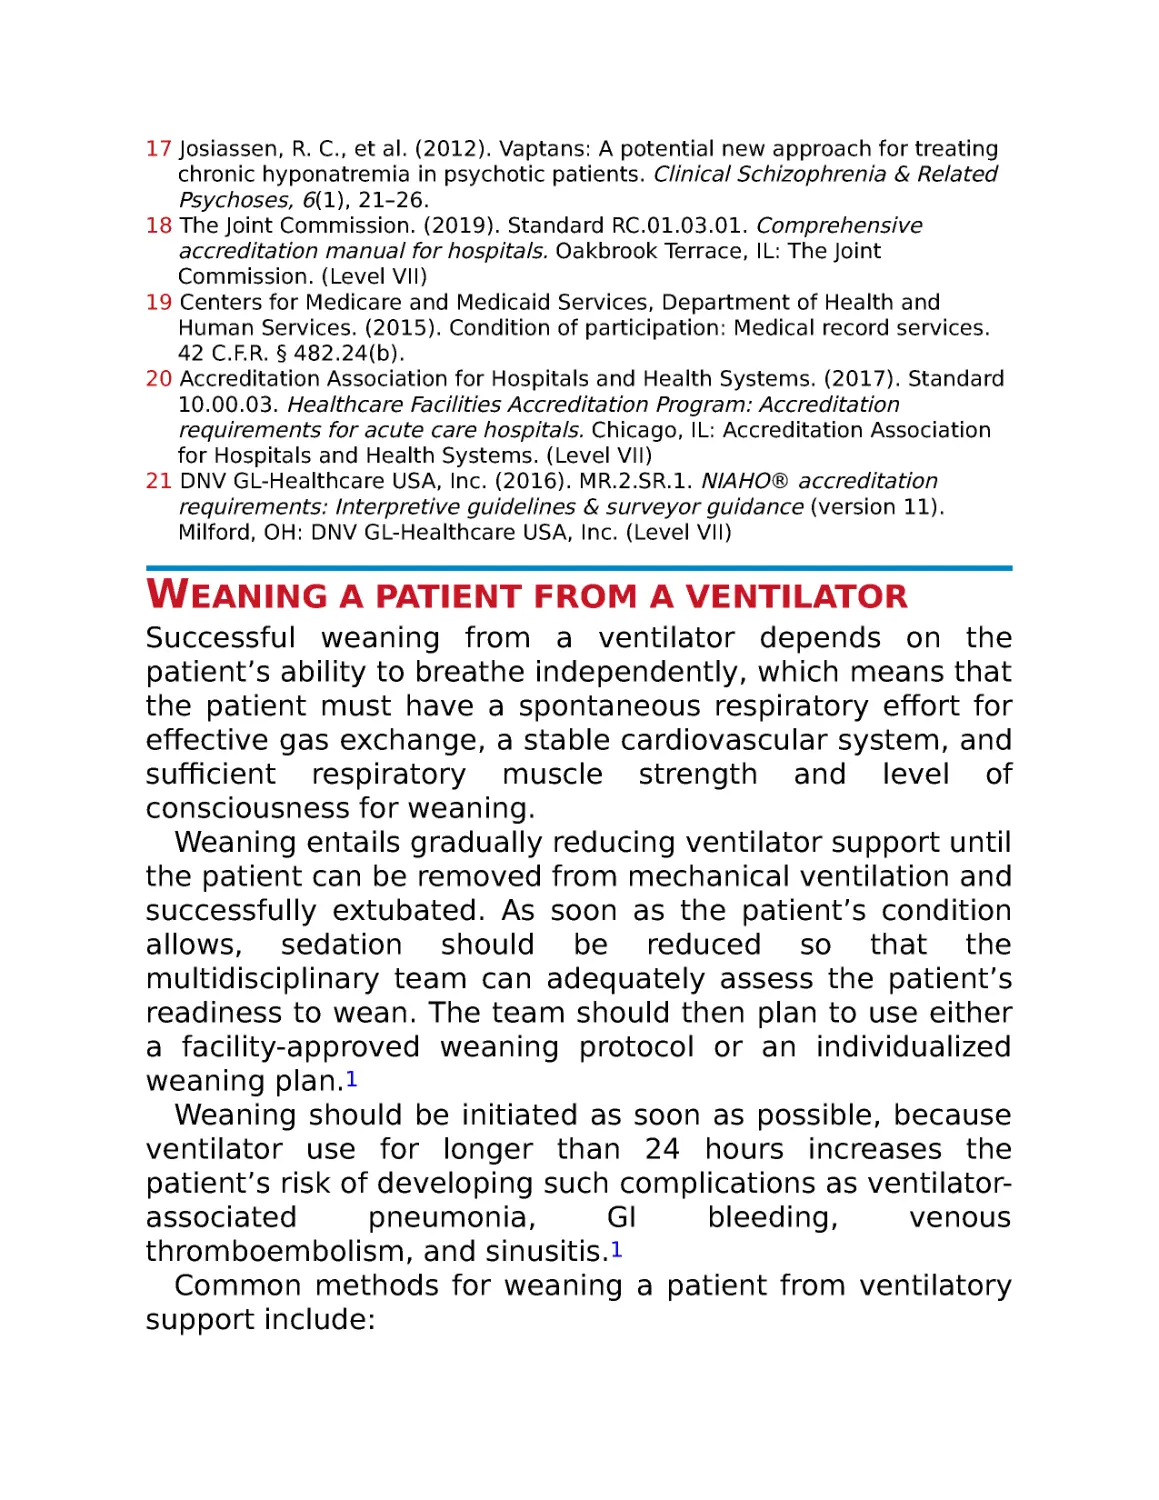 Weaning a patient from a ventilator